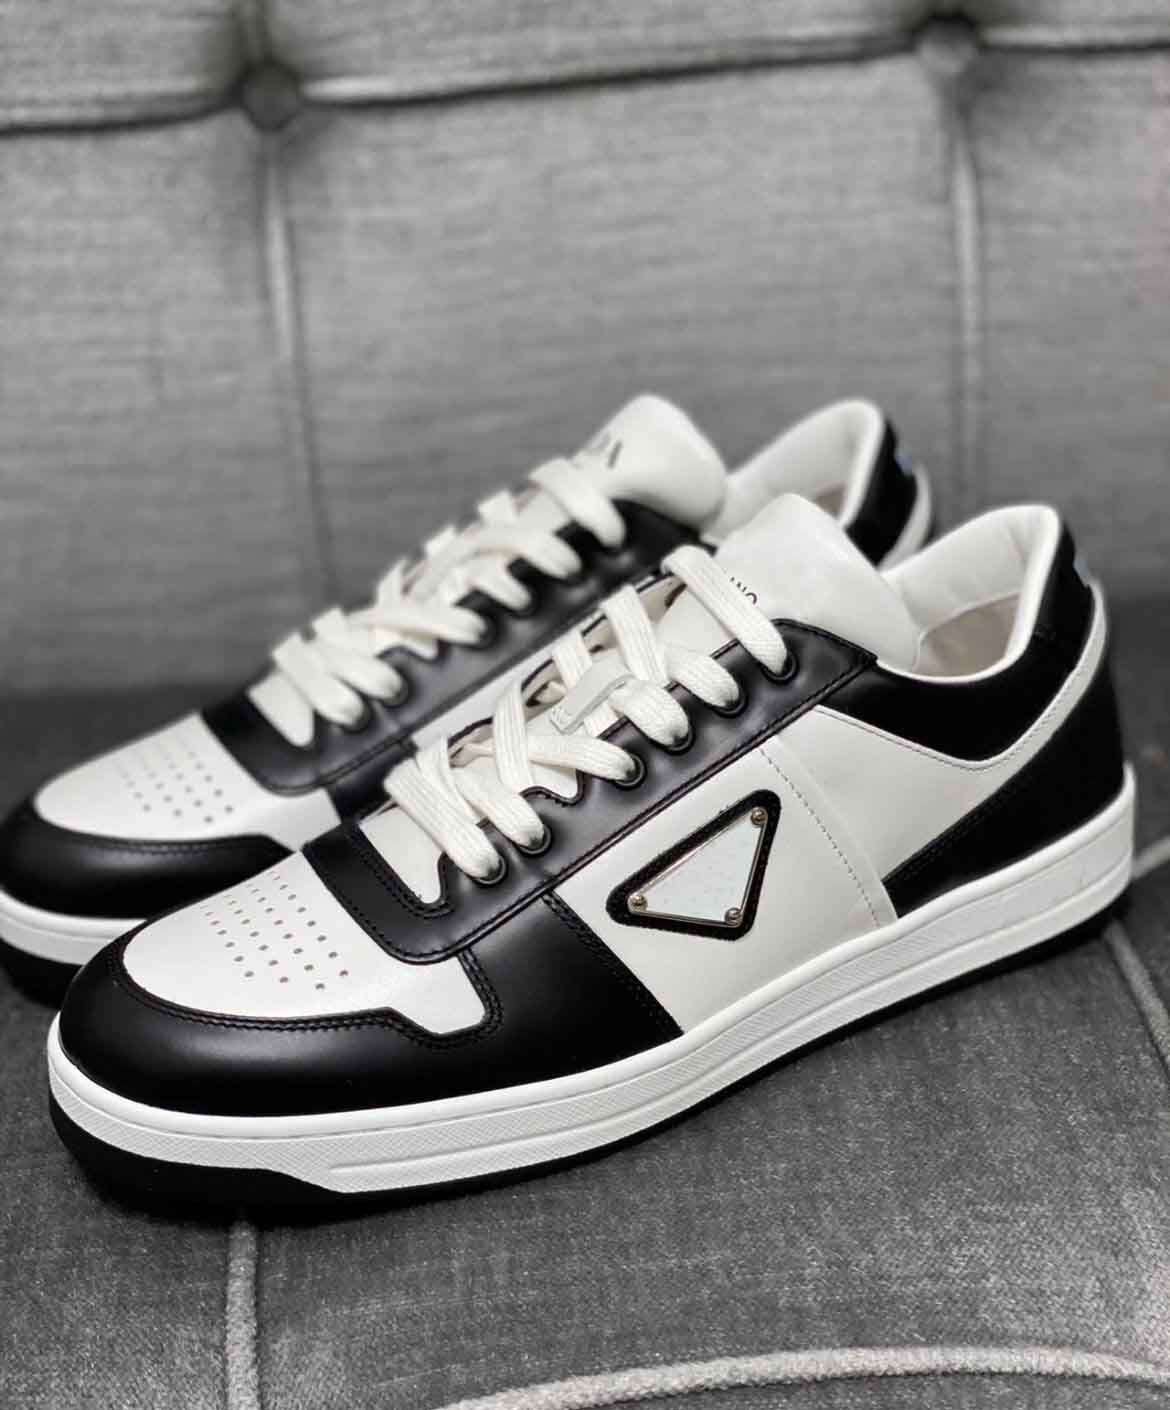 Men Sneakers Shoes Downtown Sporty Leather Rubber Sole Low Top Casual Top Design Discount Skateboard Walking EU38 46 From Vernas, $29.6 | DHgate.Com